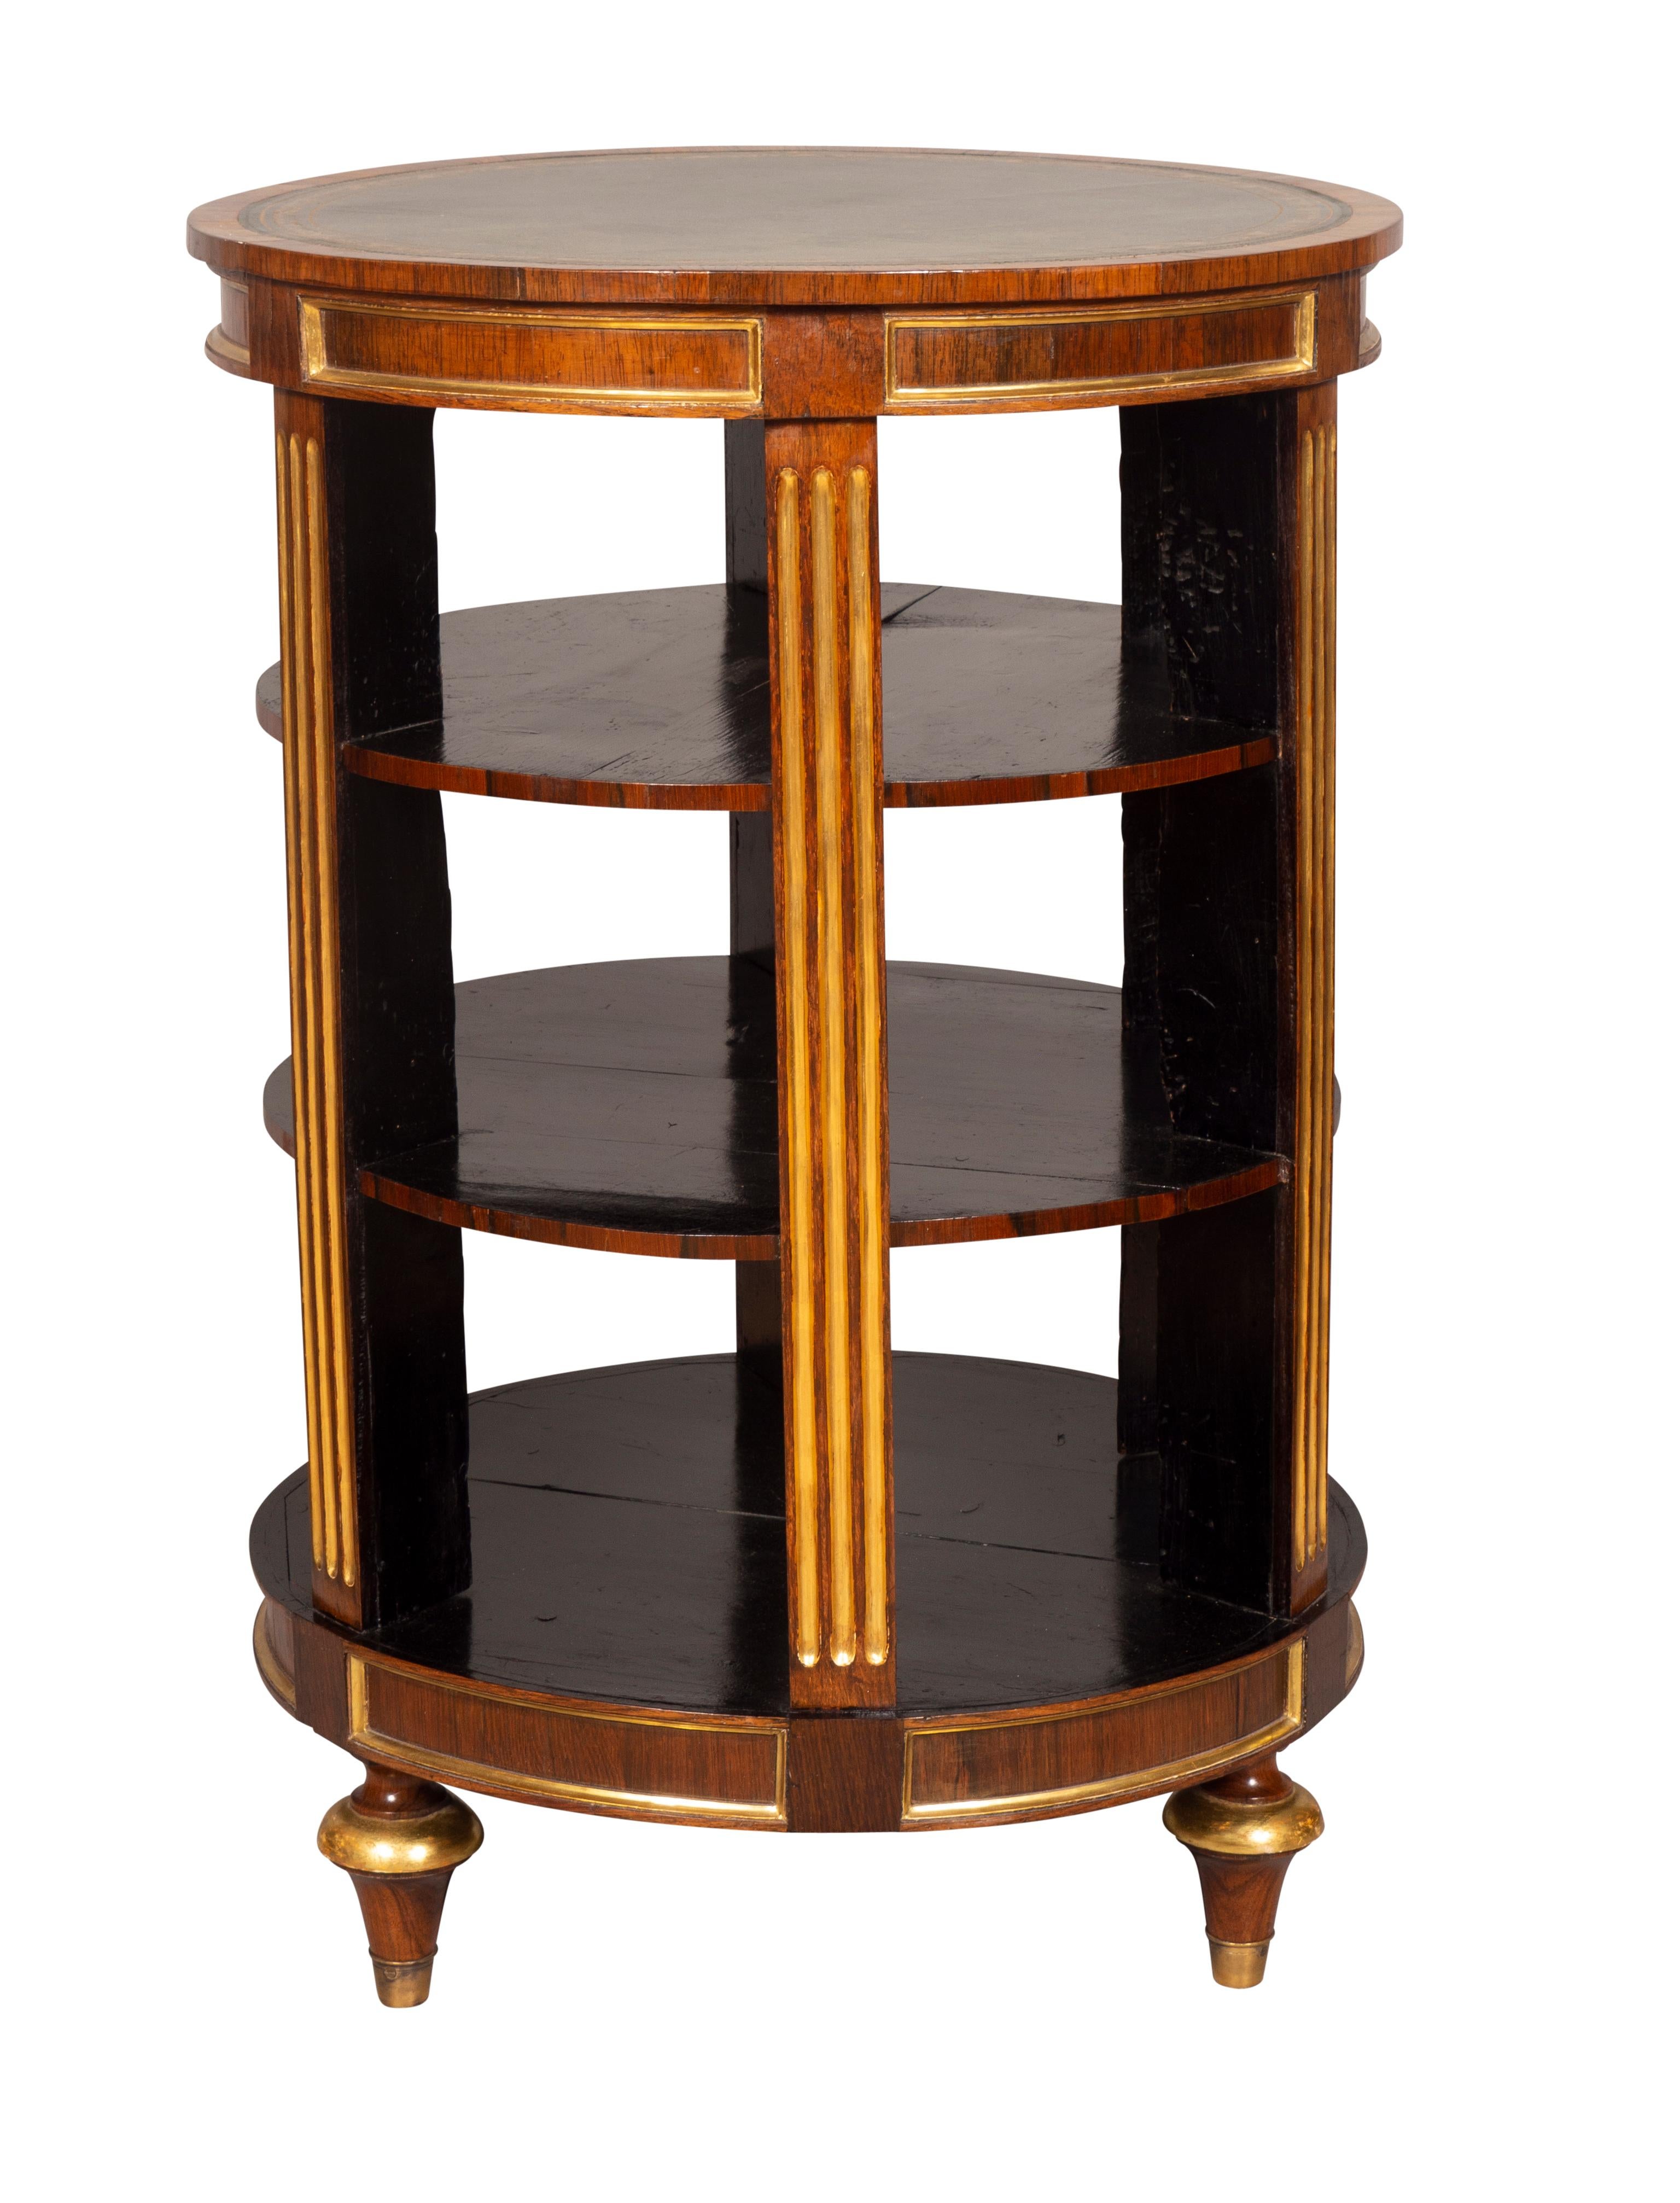 English Regency Rosewood And Giltwood Cylindrical Book Stand